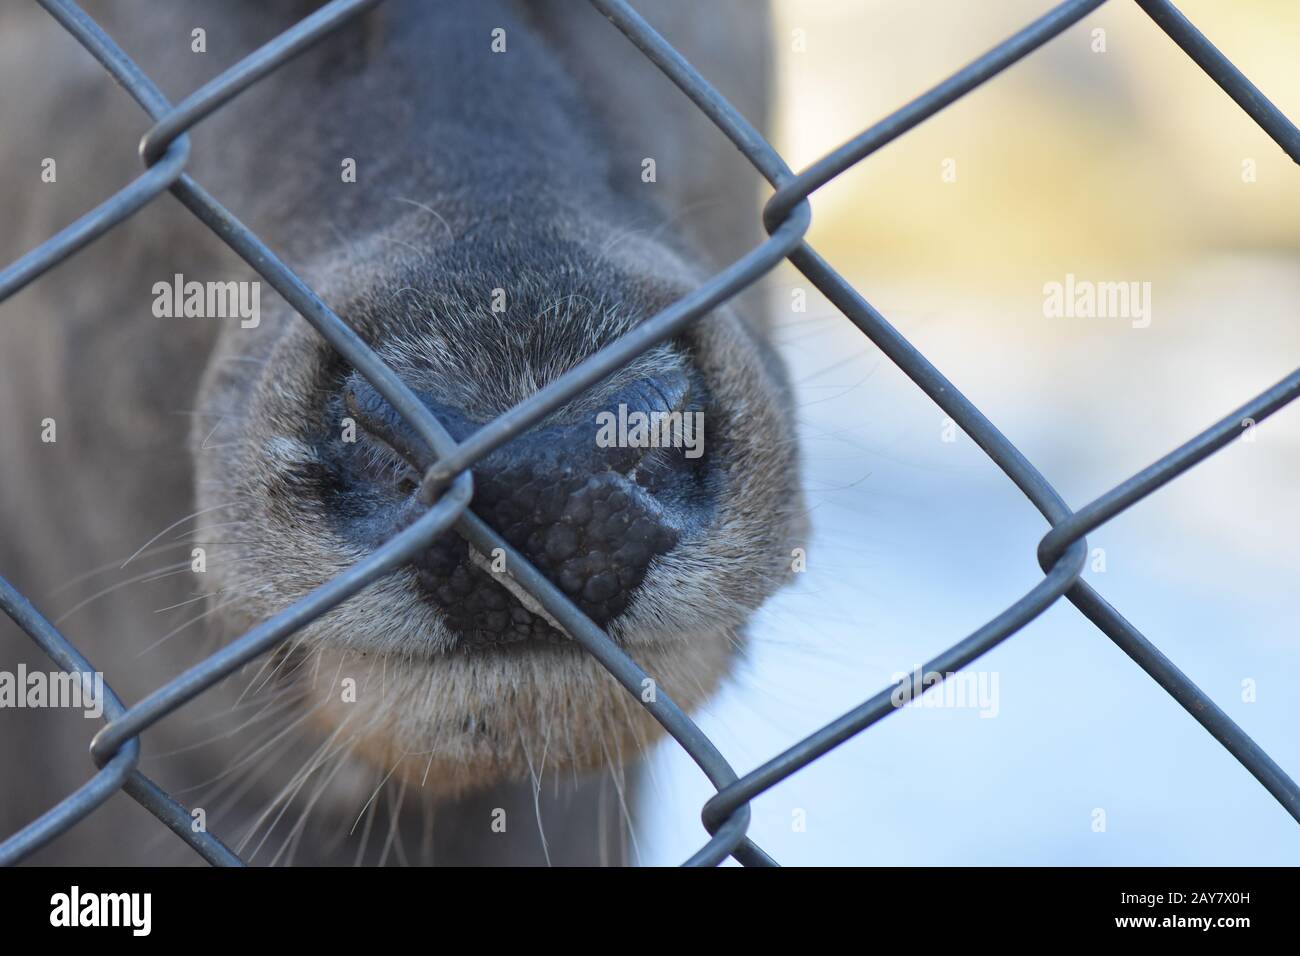 Deer nose behind the netting Stock Photo